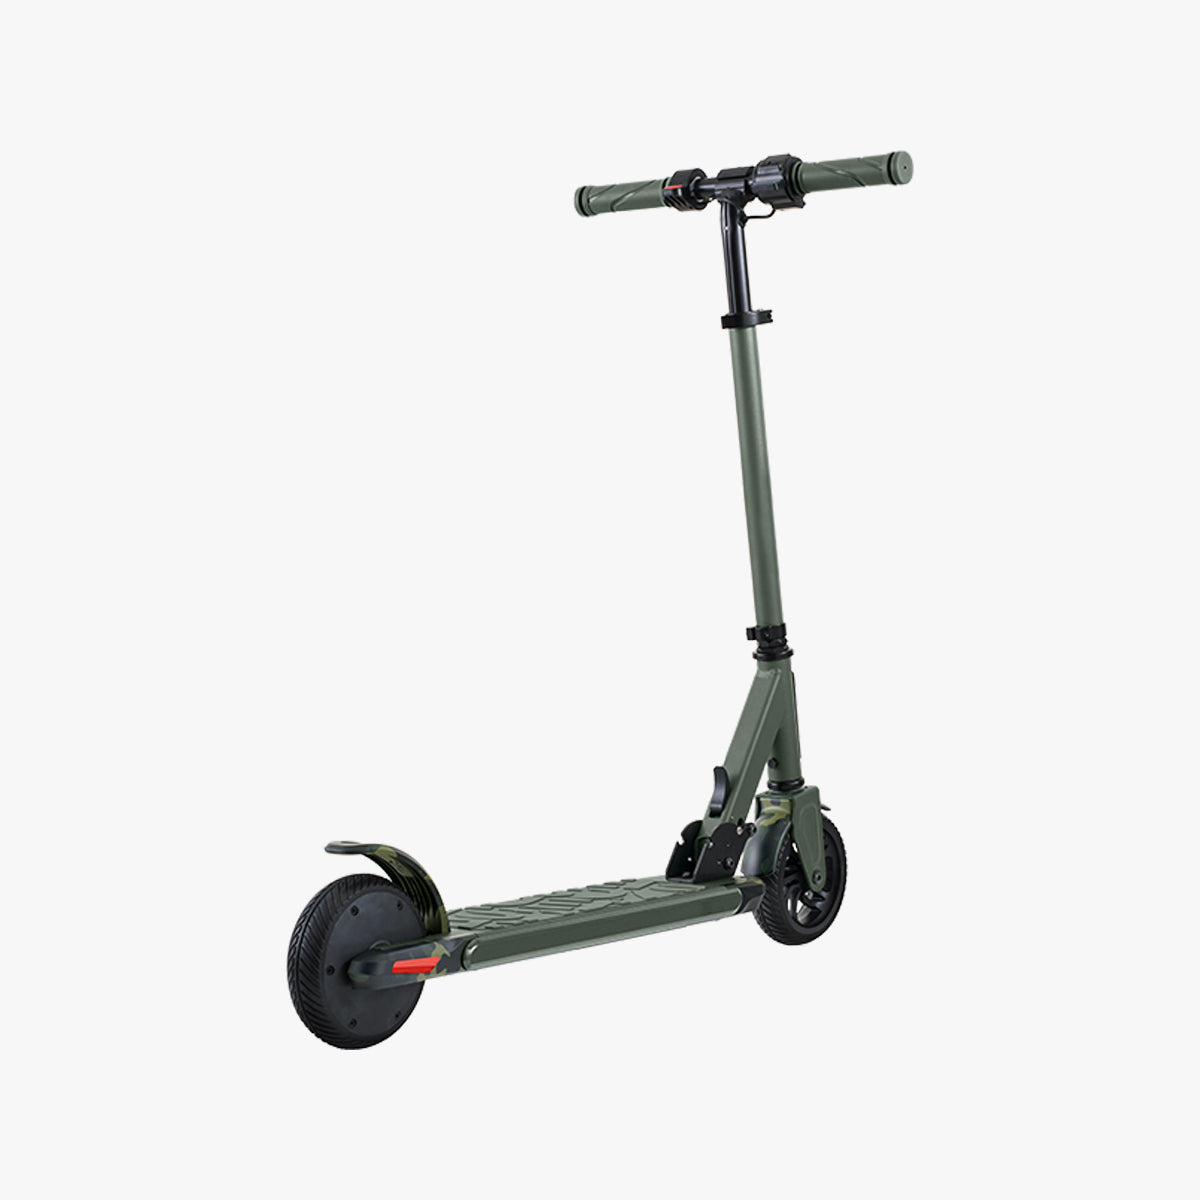 rear view of the camo relay scooter